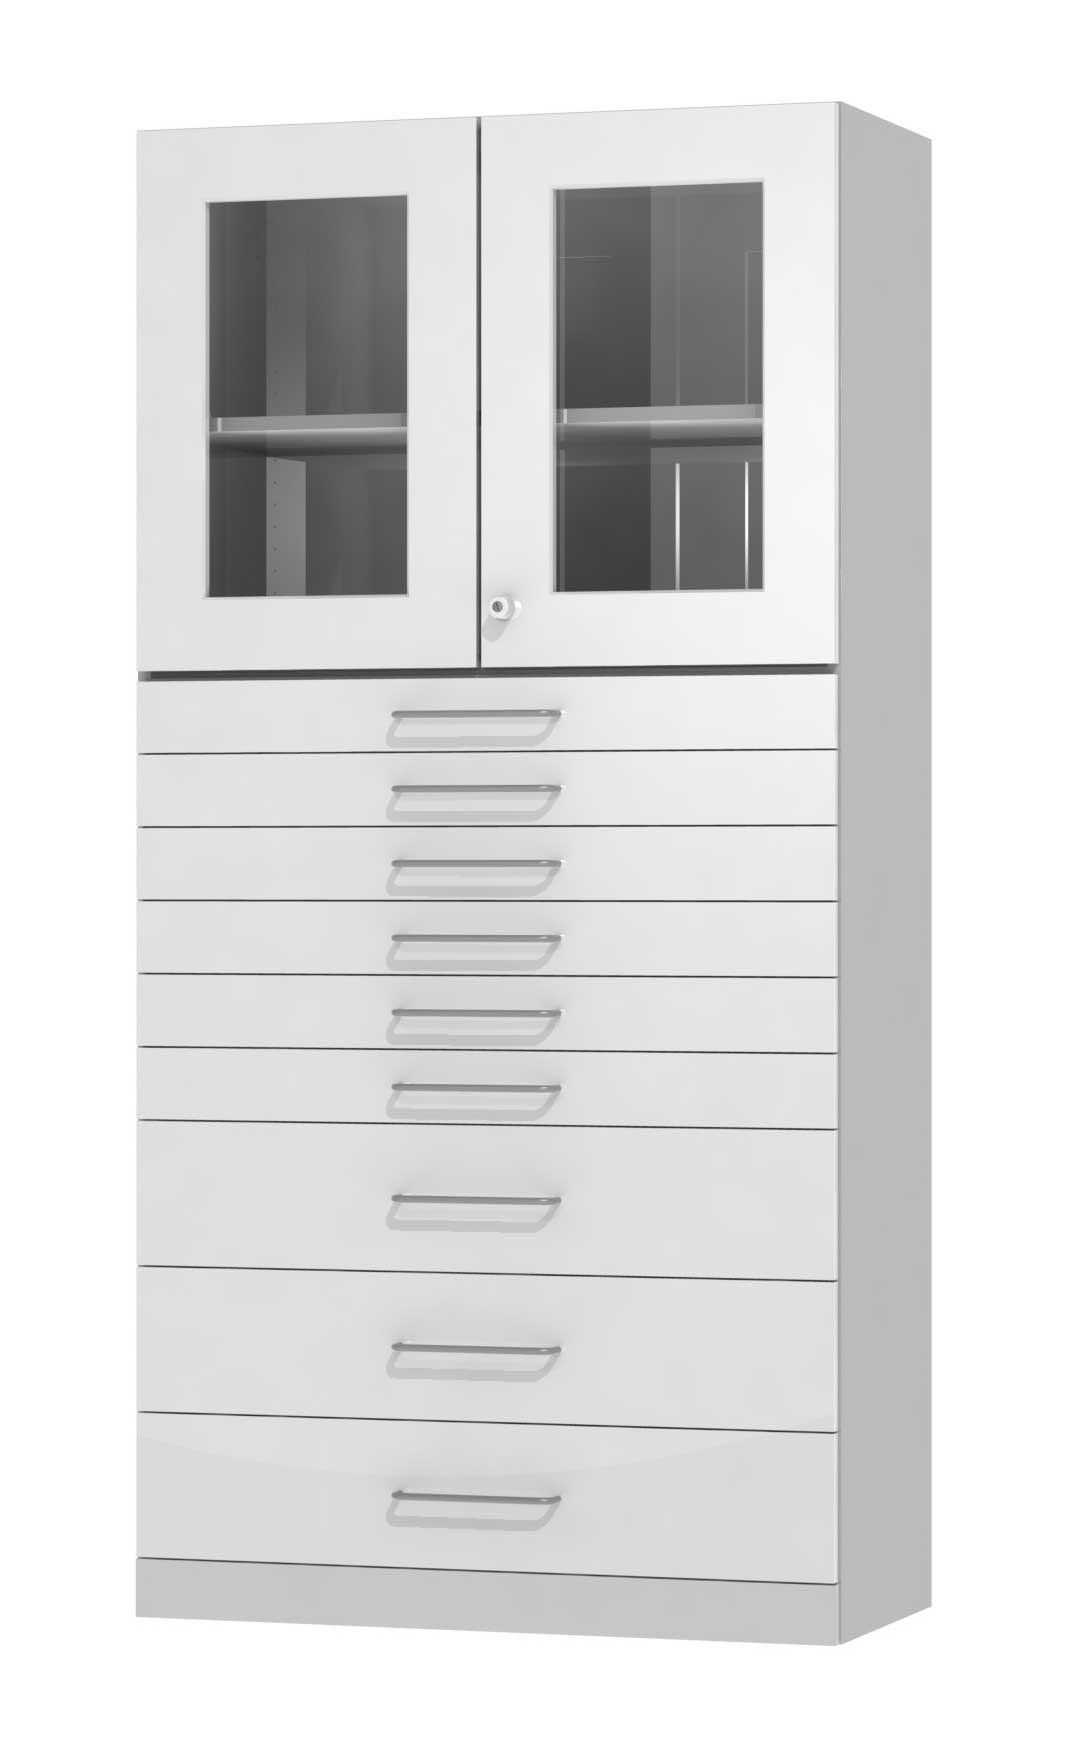 Cabinet combination of base cabinet with drawers and top cabinet with glass doors